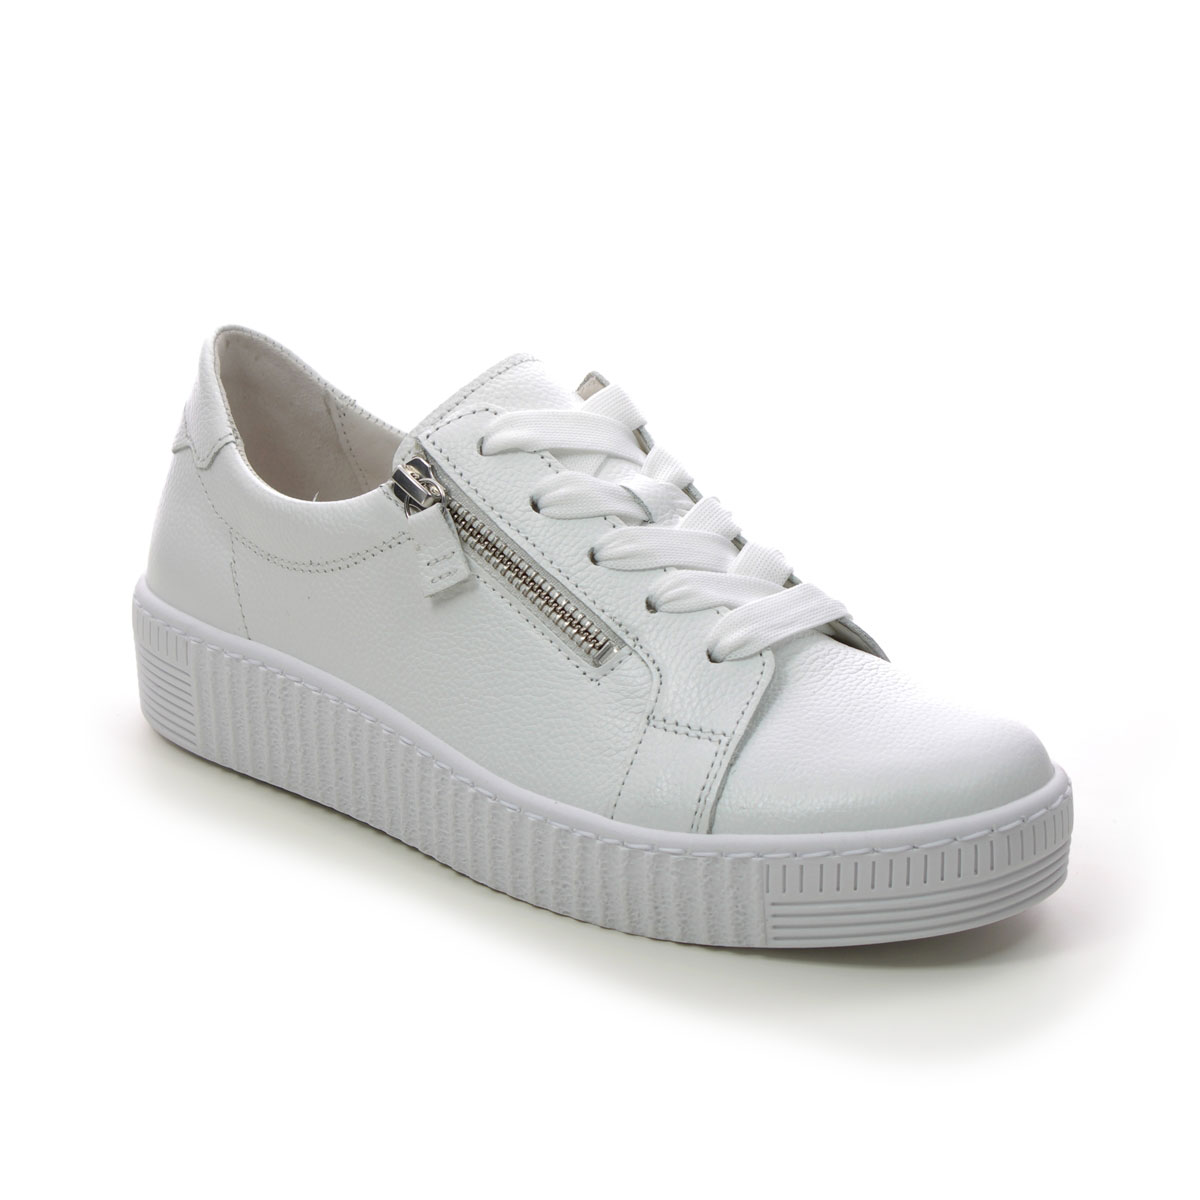 Gabor Wisdom White Leather Womens Trainers 23.334.21 In Size 7 In Plain White Leather  Womens Trainers In Soft White Leather Leather